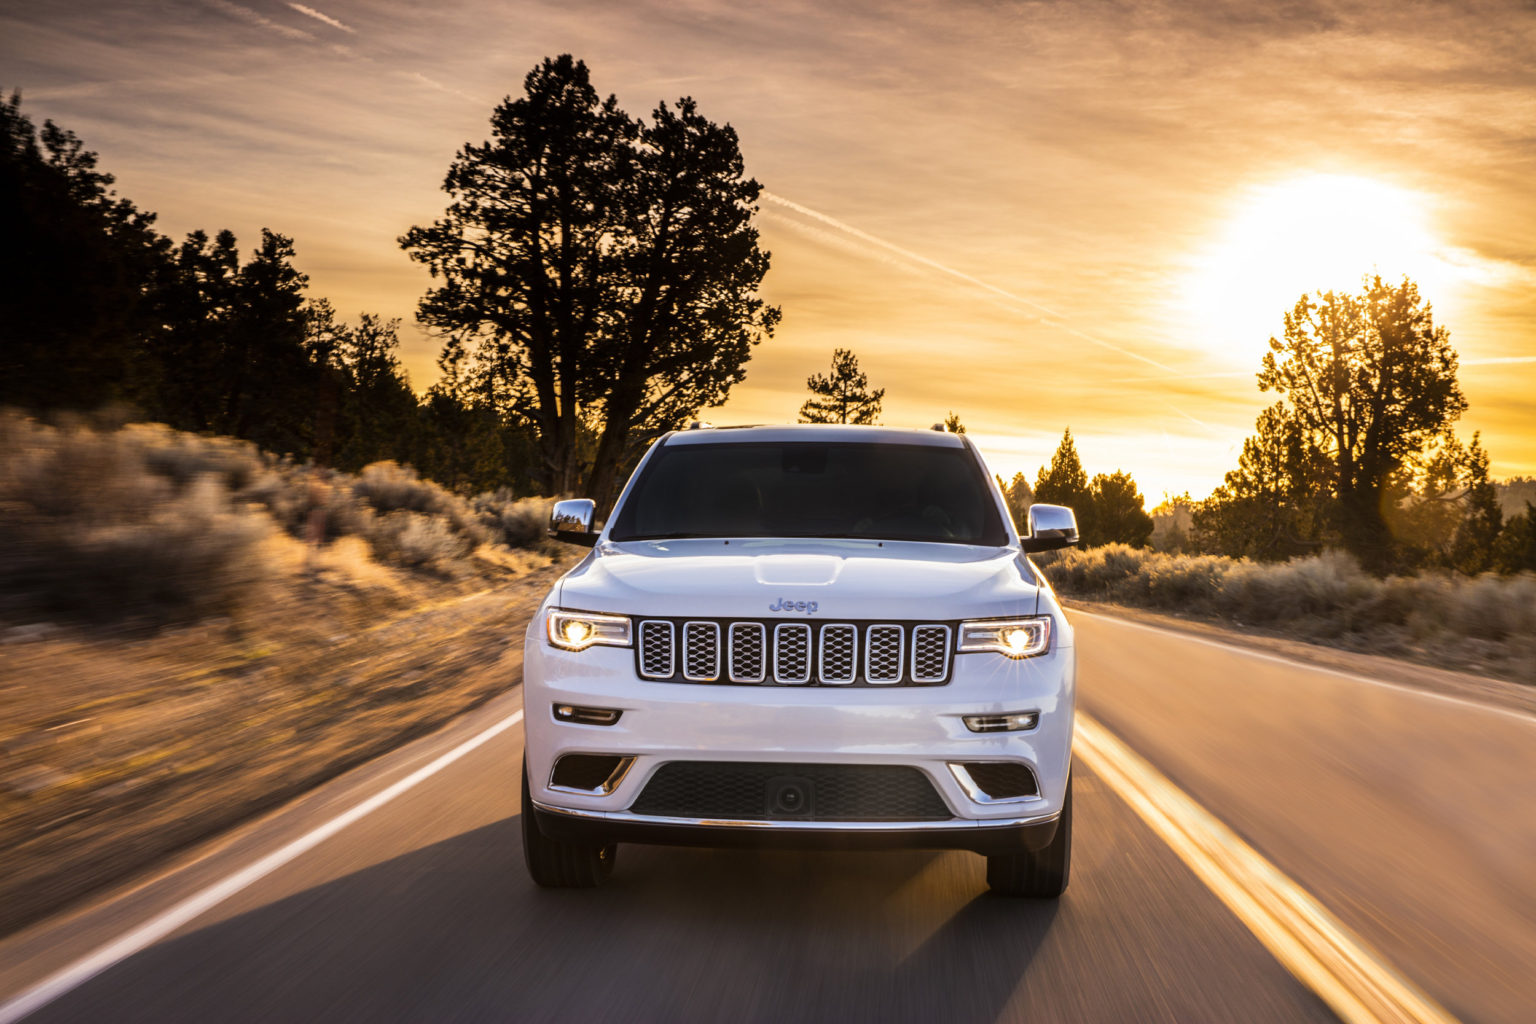 The Jeep Grand Cherokee Summit blends the finer appointments of the model with off-road prowess and family-friendly technology.